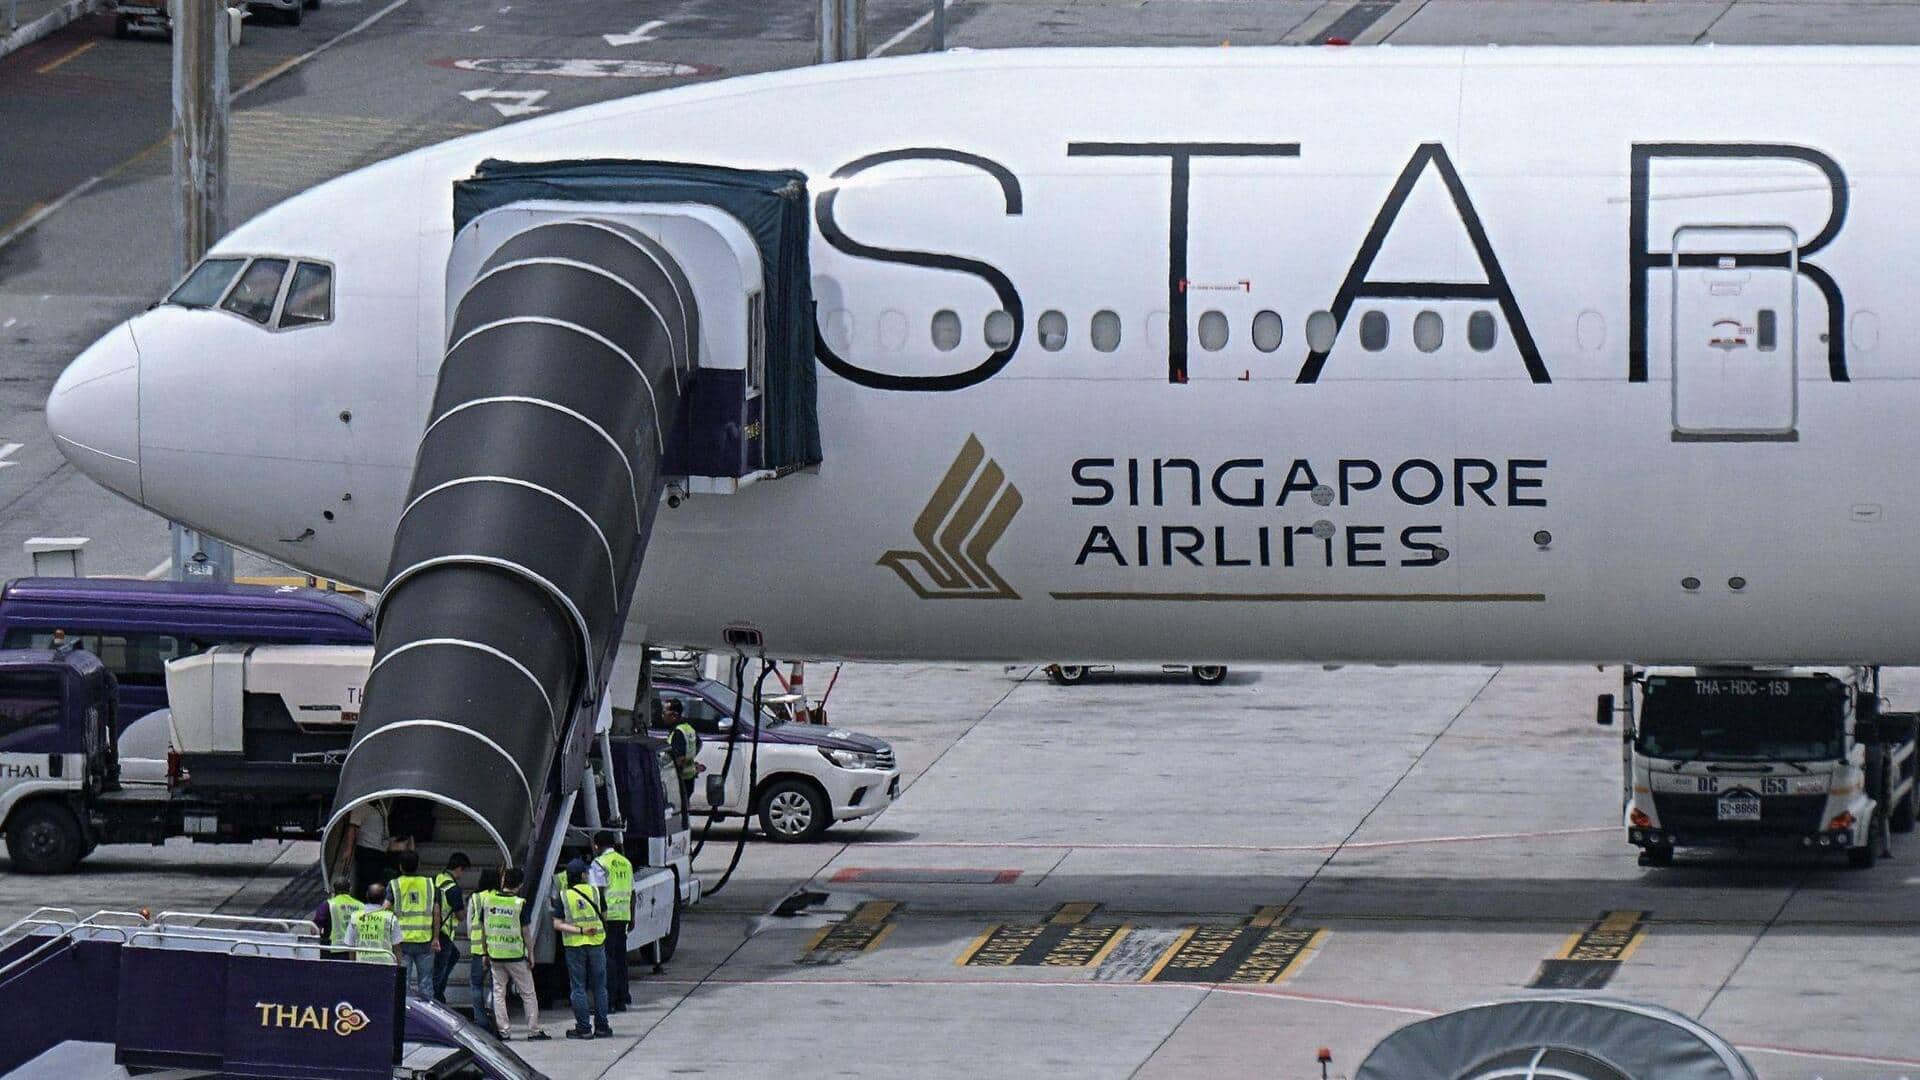 Singapore Airlines offers compensation to passengers injured in turbulence incident